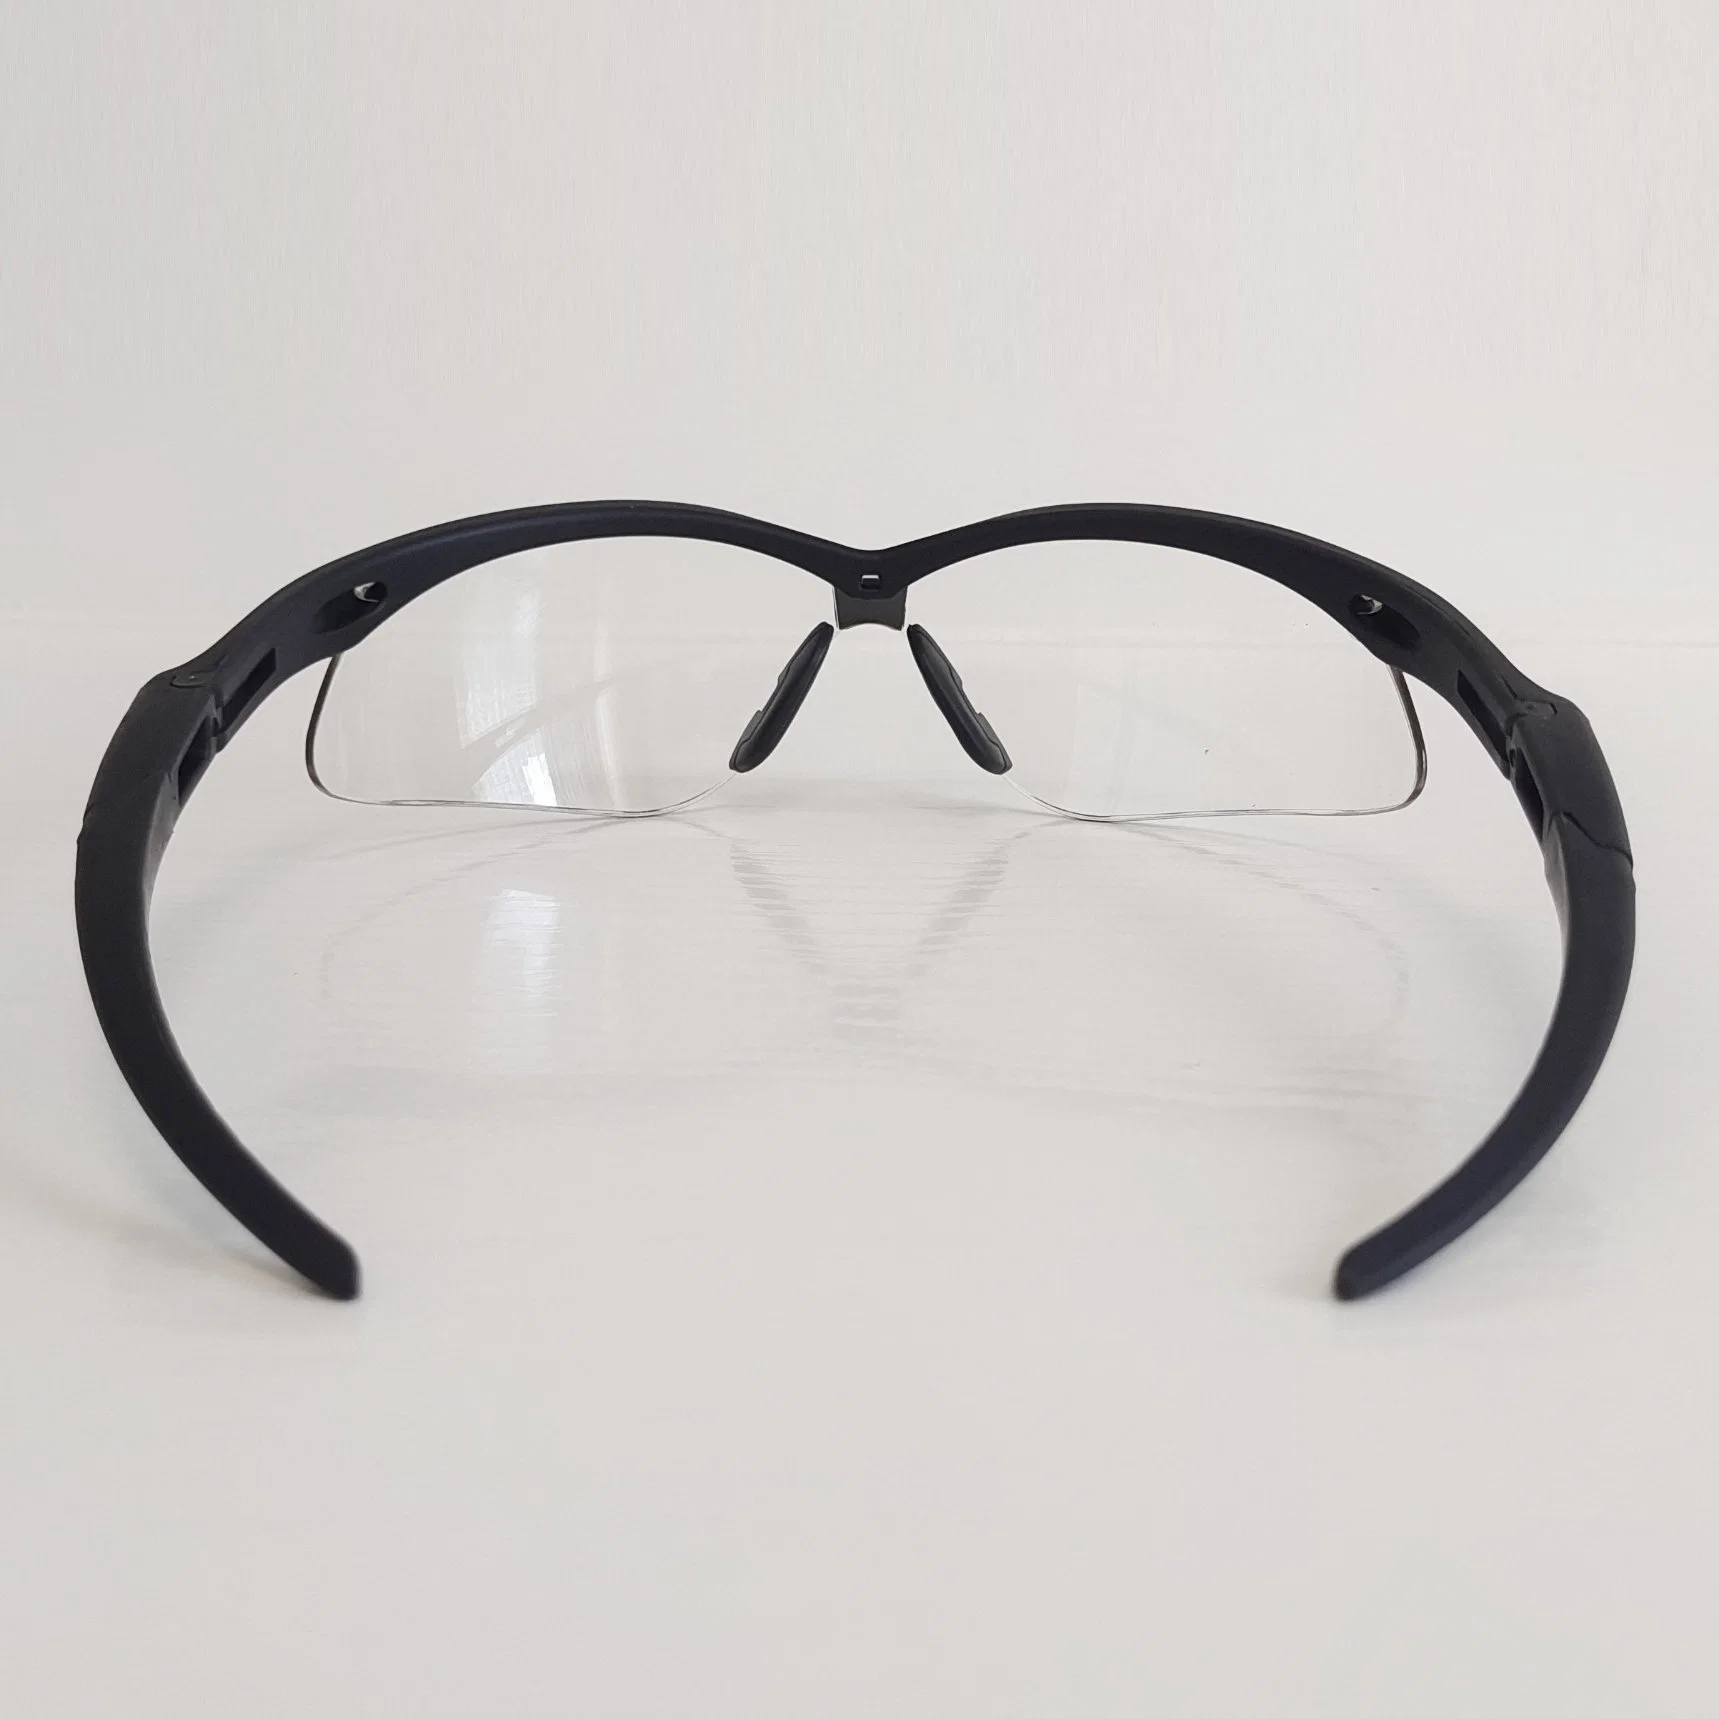 Anti-Scratch Personal Clear Eyewear Eye Protection Protective Sport Safety Goggles Glasses